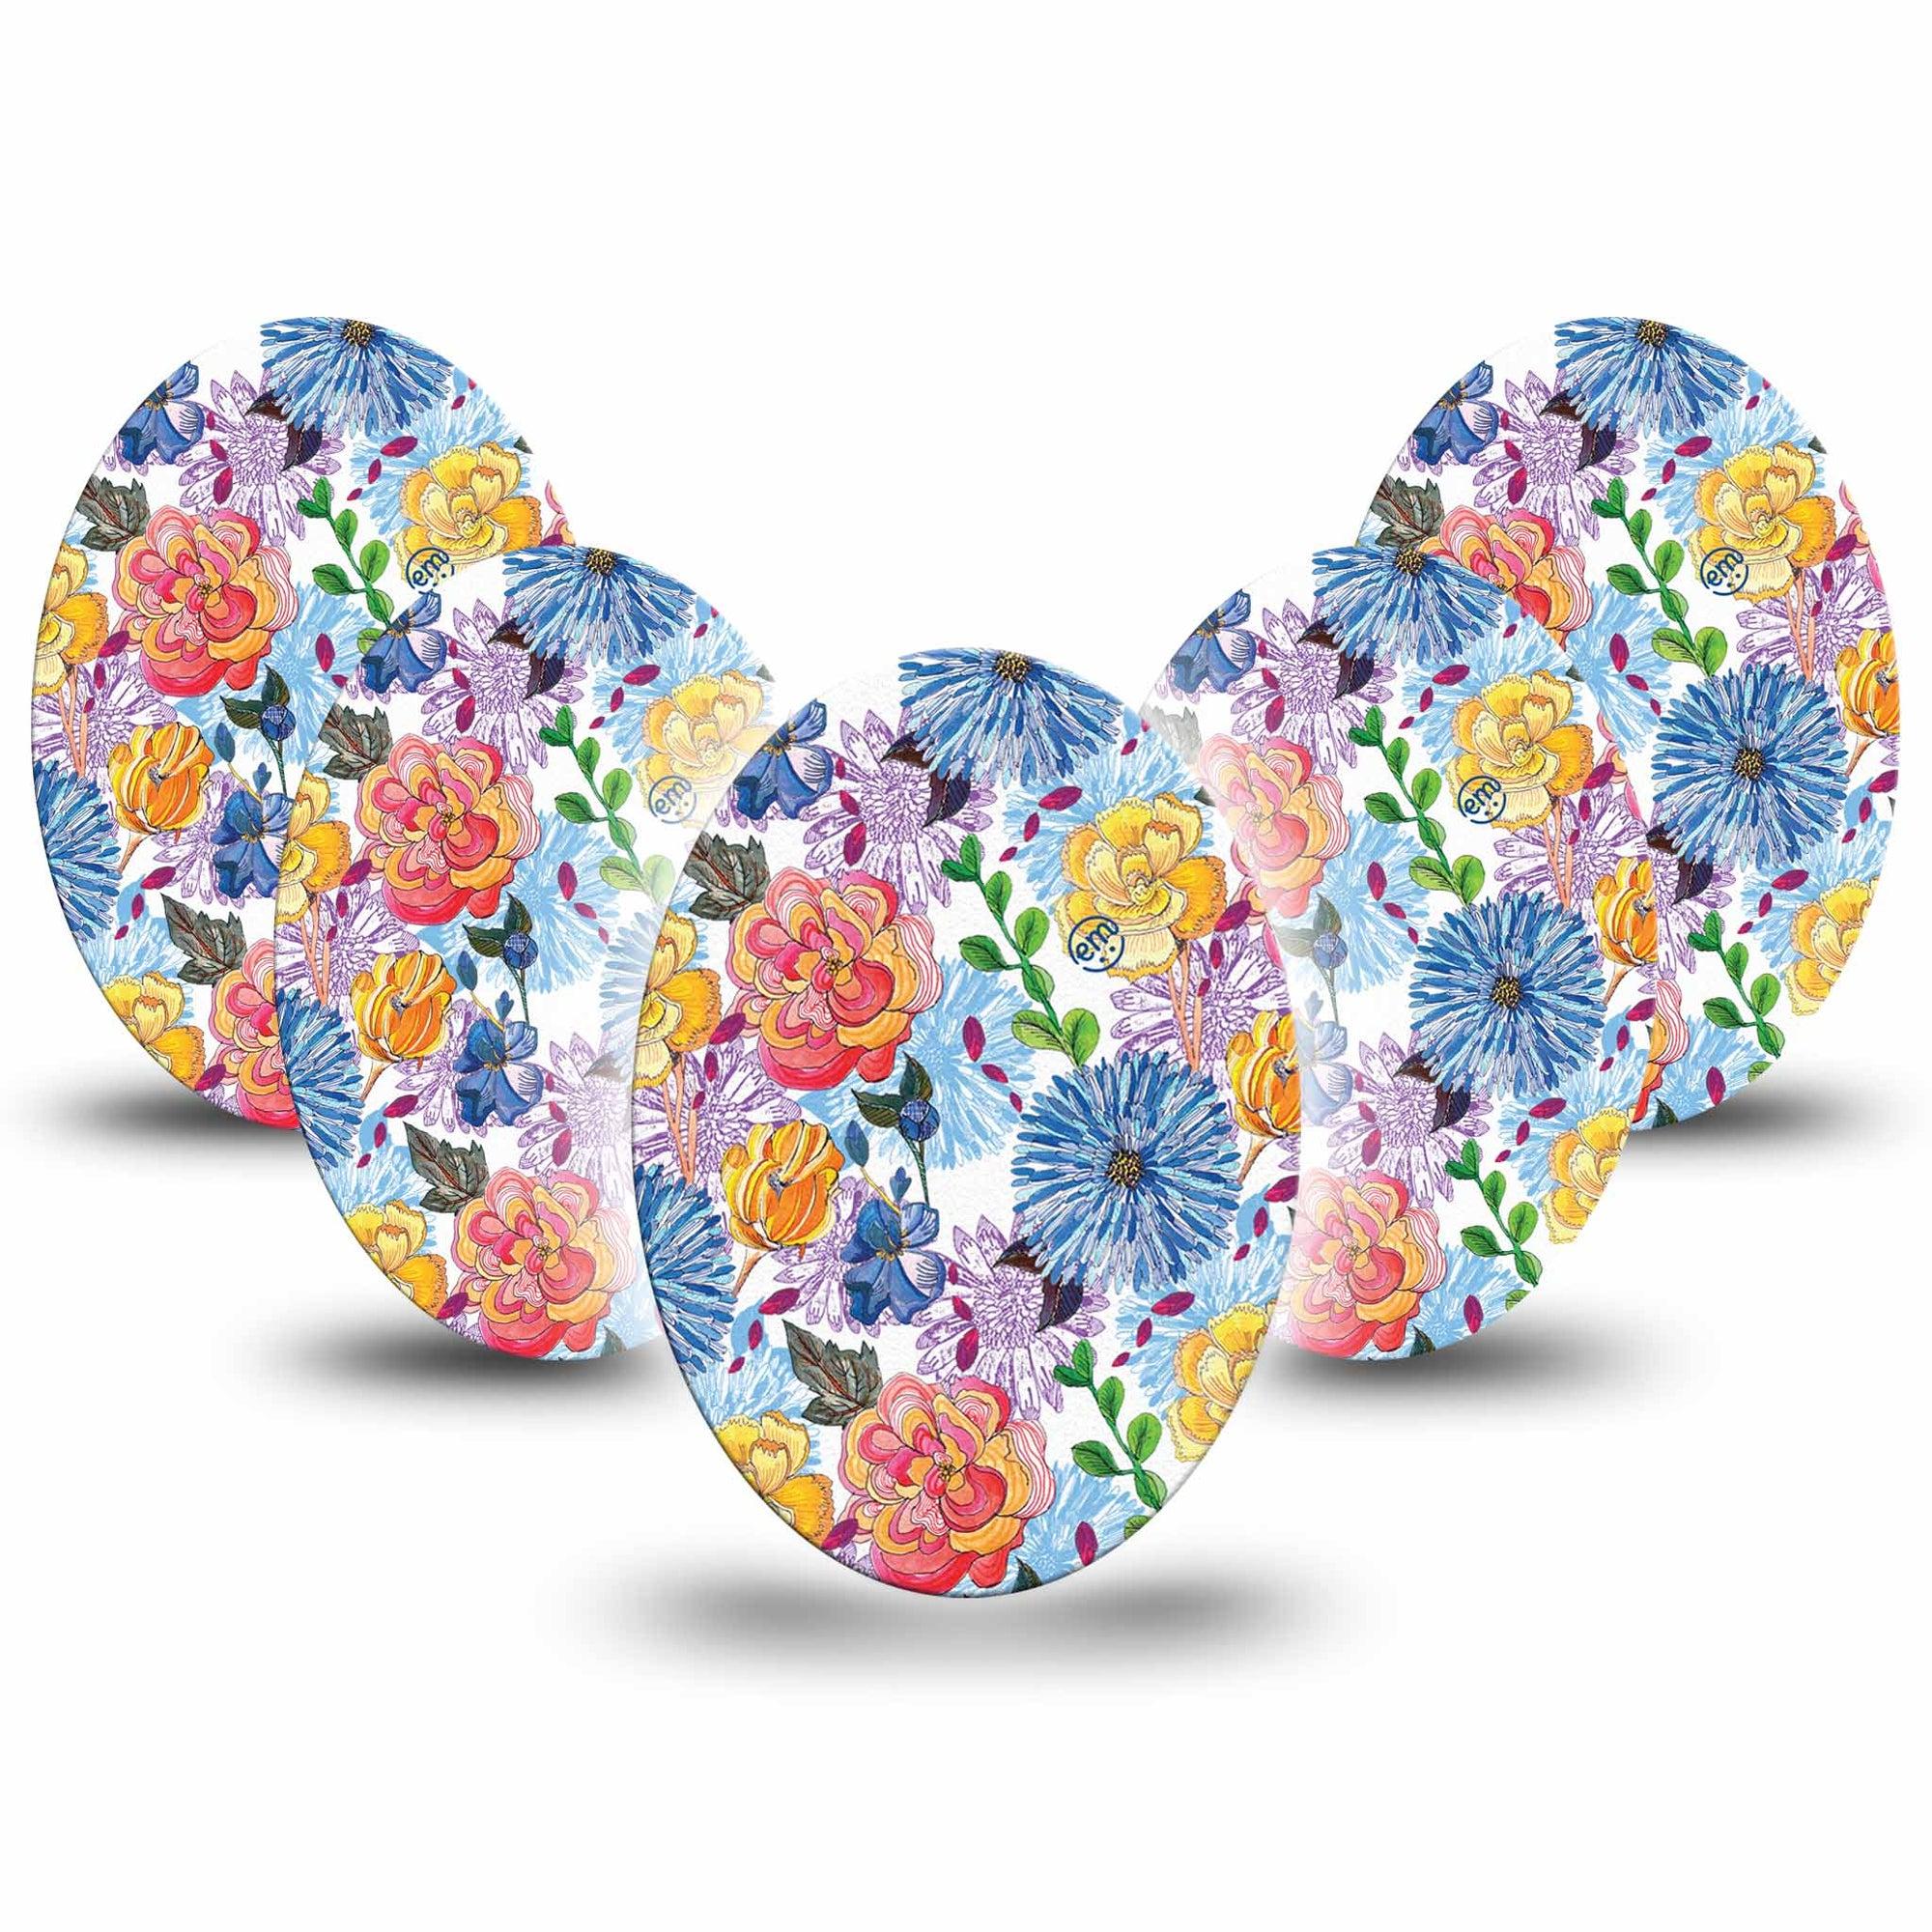 Medtronic Enlite / Guardian Stylised Floral Universal Oval Tape, 5-Pack, Floral Grounds Inspired, Medtronic Overlay Patch Design